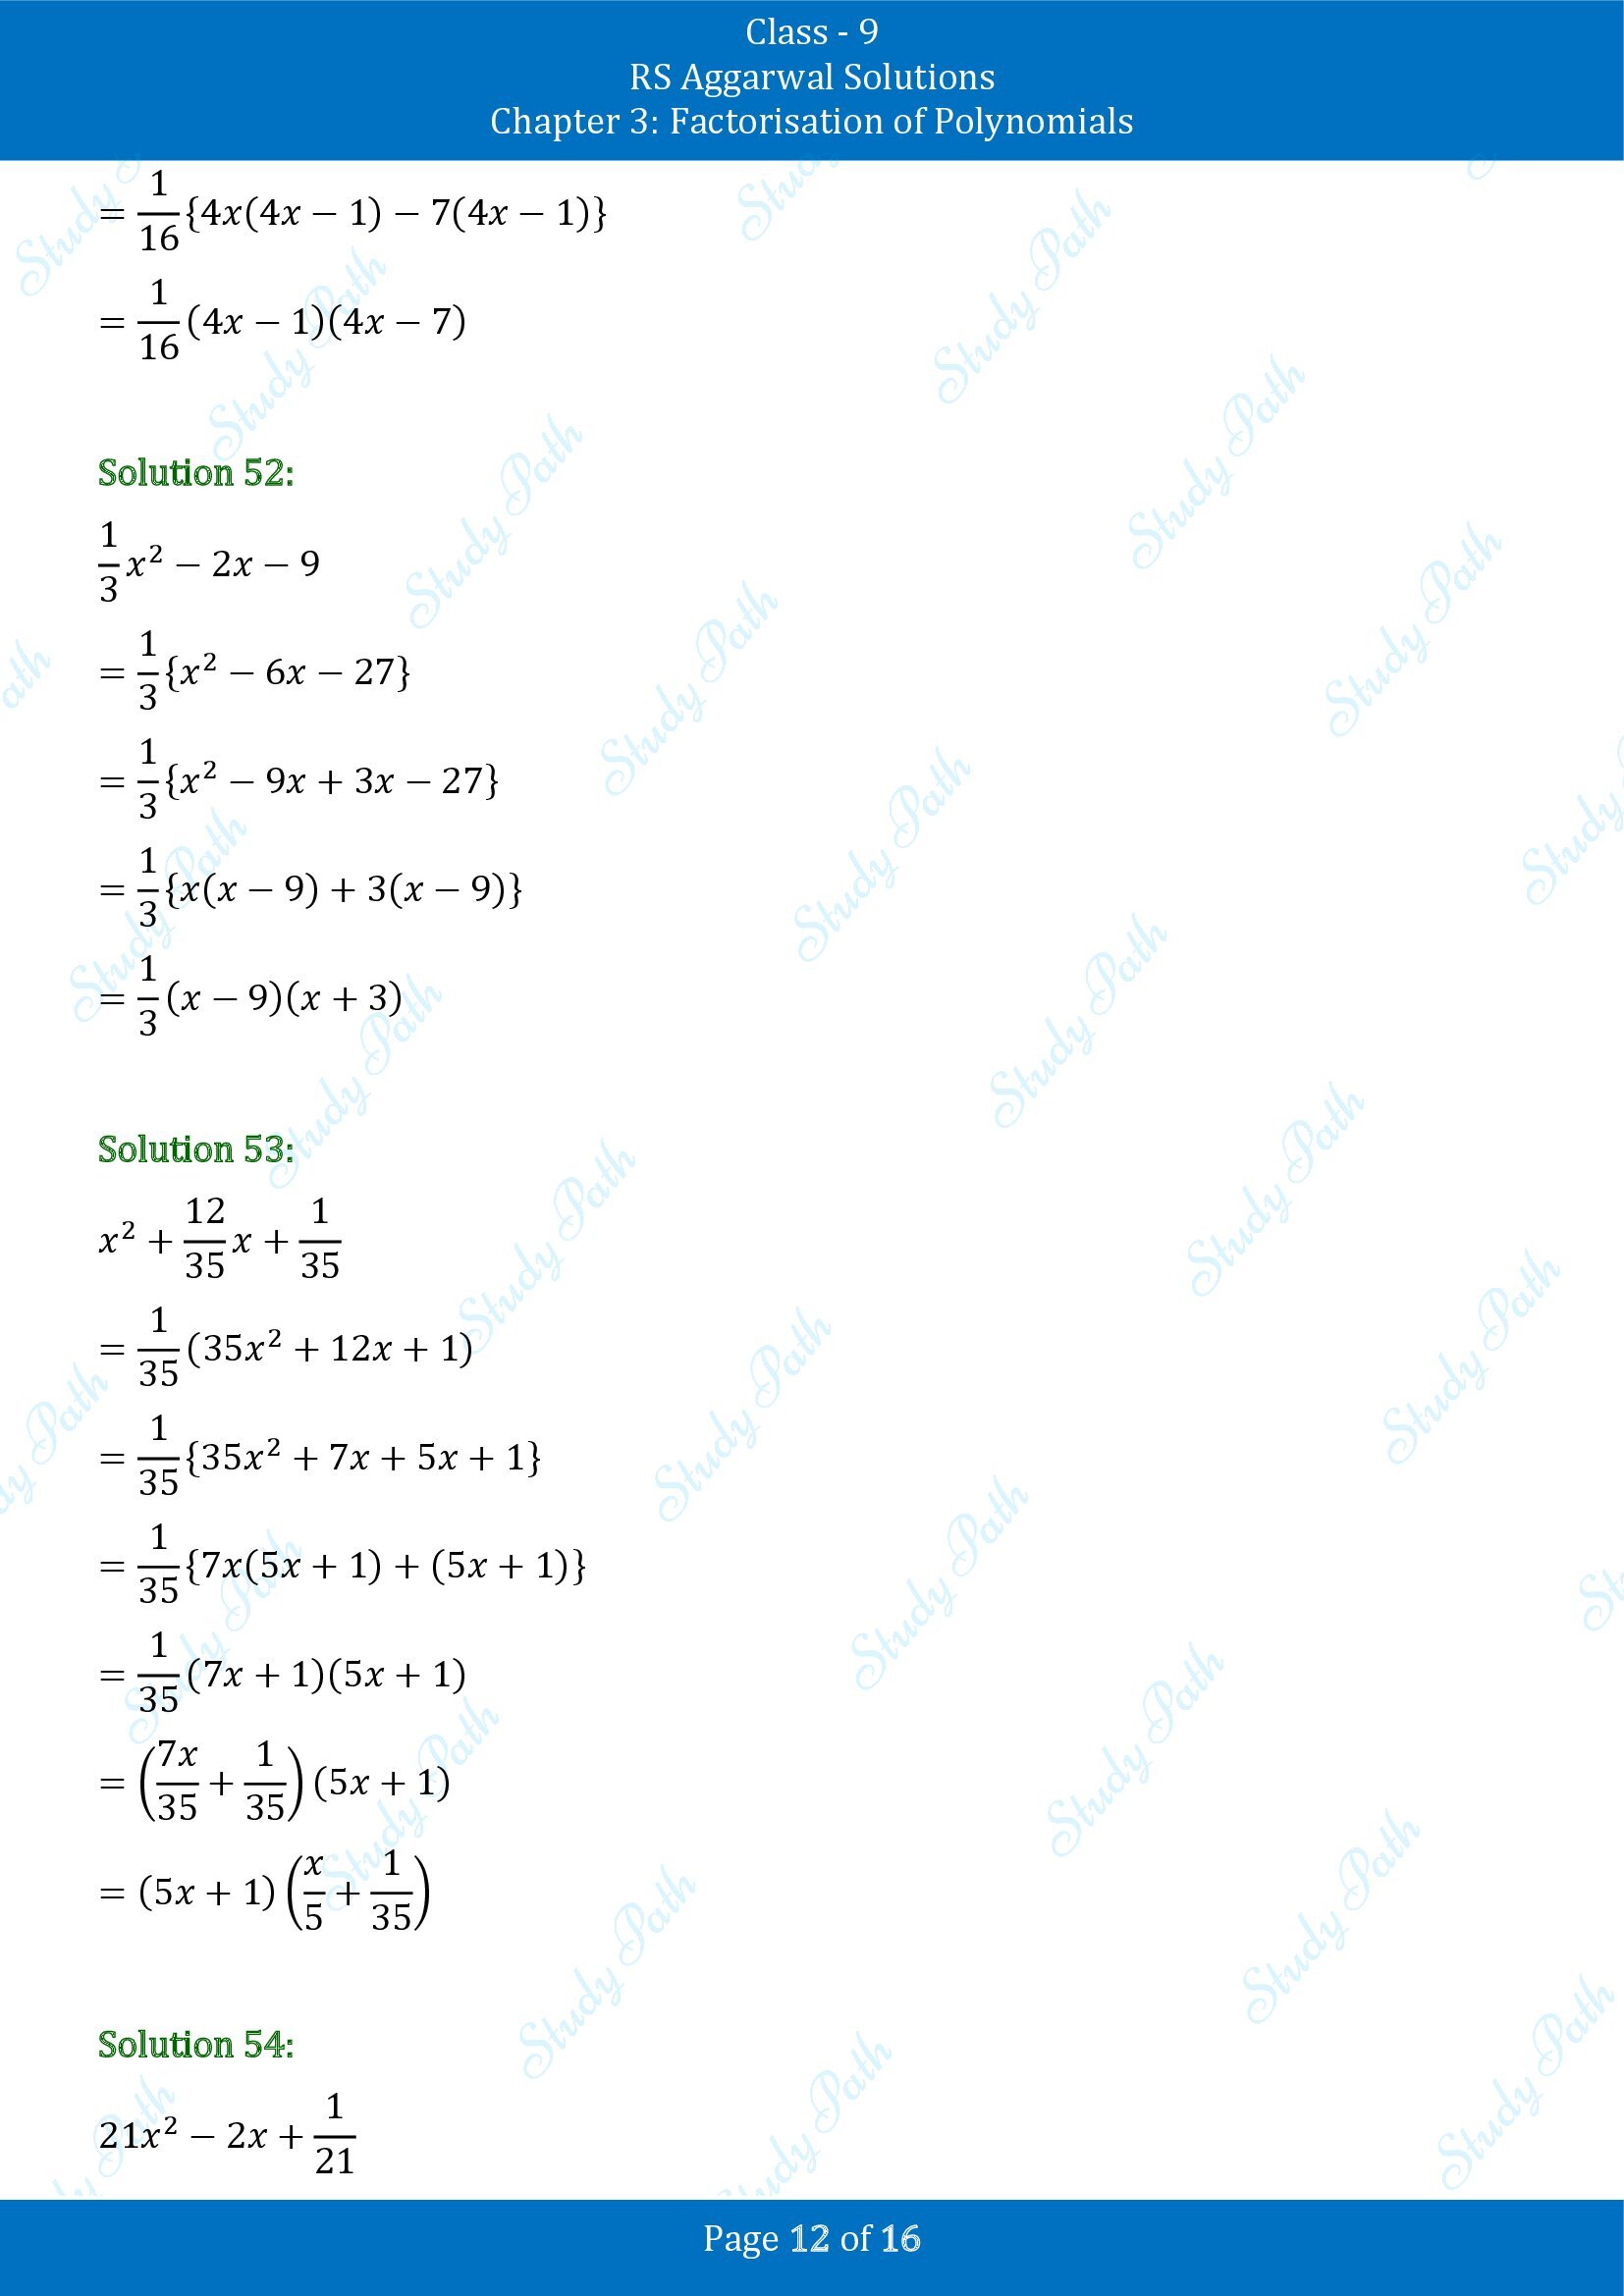 RS Aggarwal Solutions Class 9 Chapter 3 Factorisation of Polynomials Exercise 3C 00012